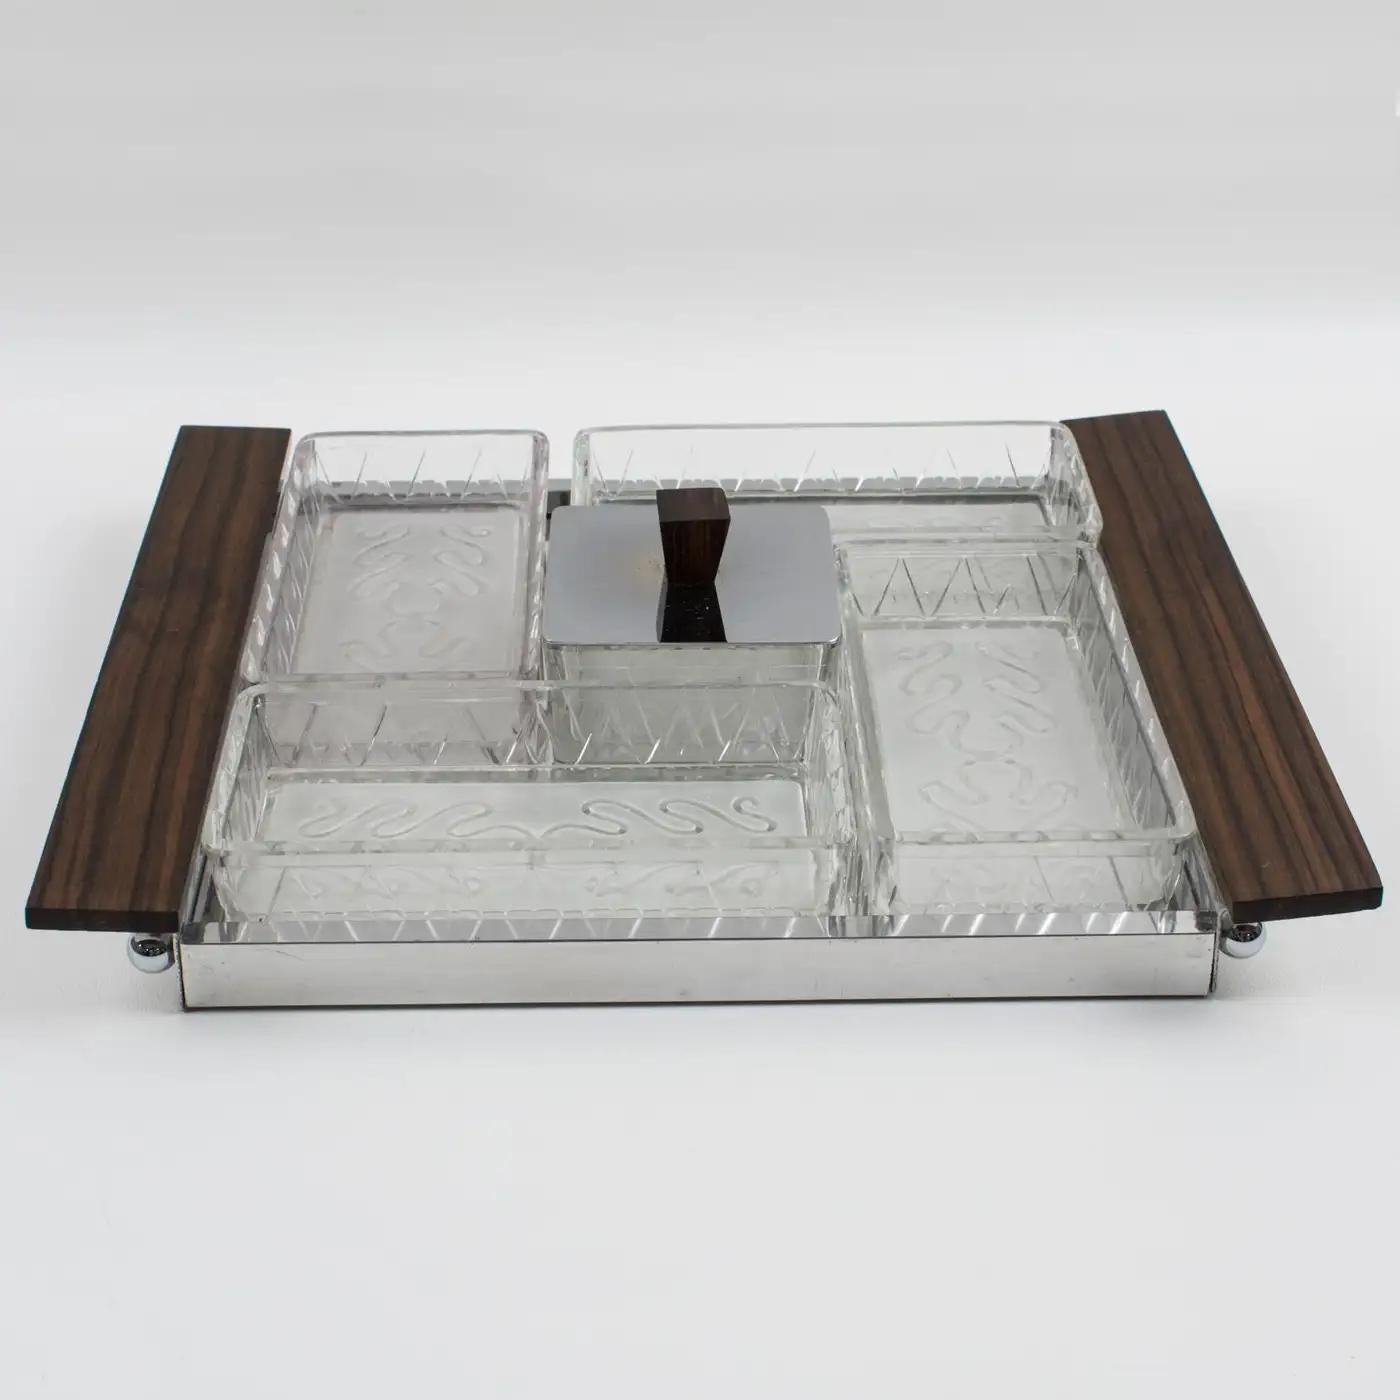 Art Deco Cocktail Barware Chrome and Macassar Wood Tray with Glass Dishes In Good Condition For Sale In Atlanta, GA